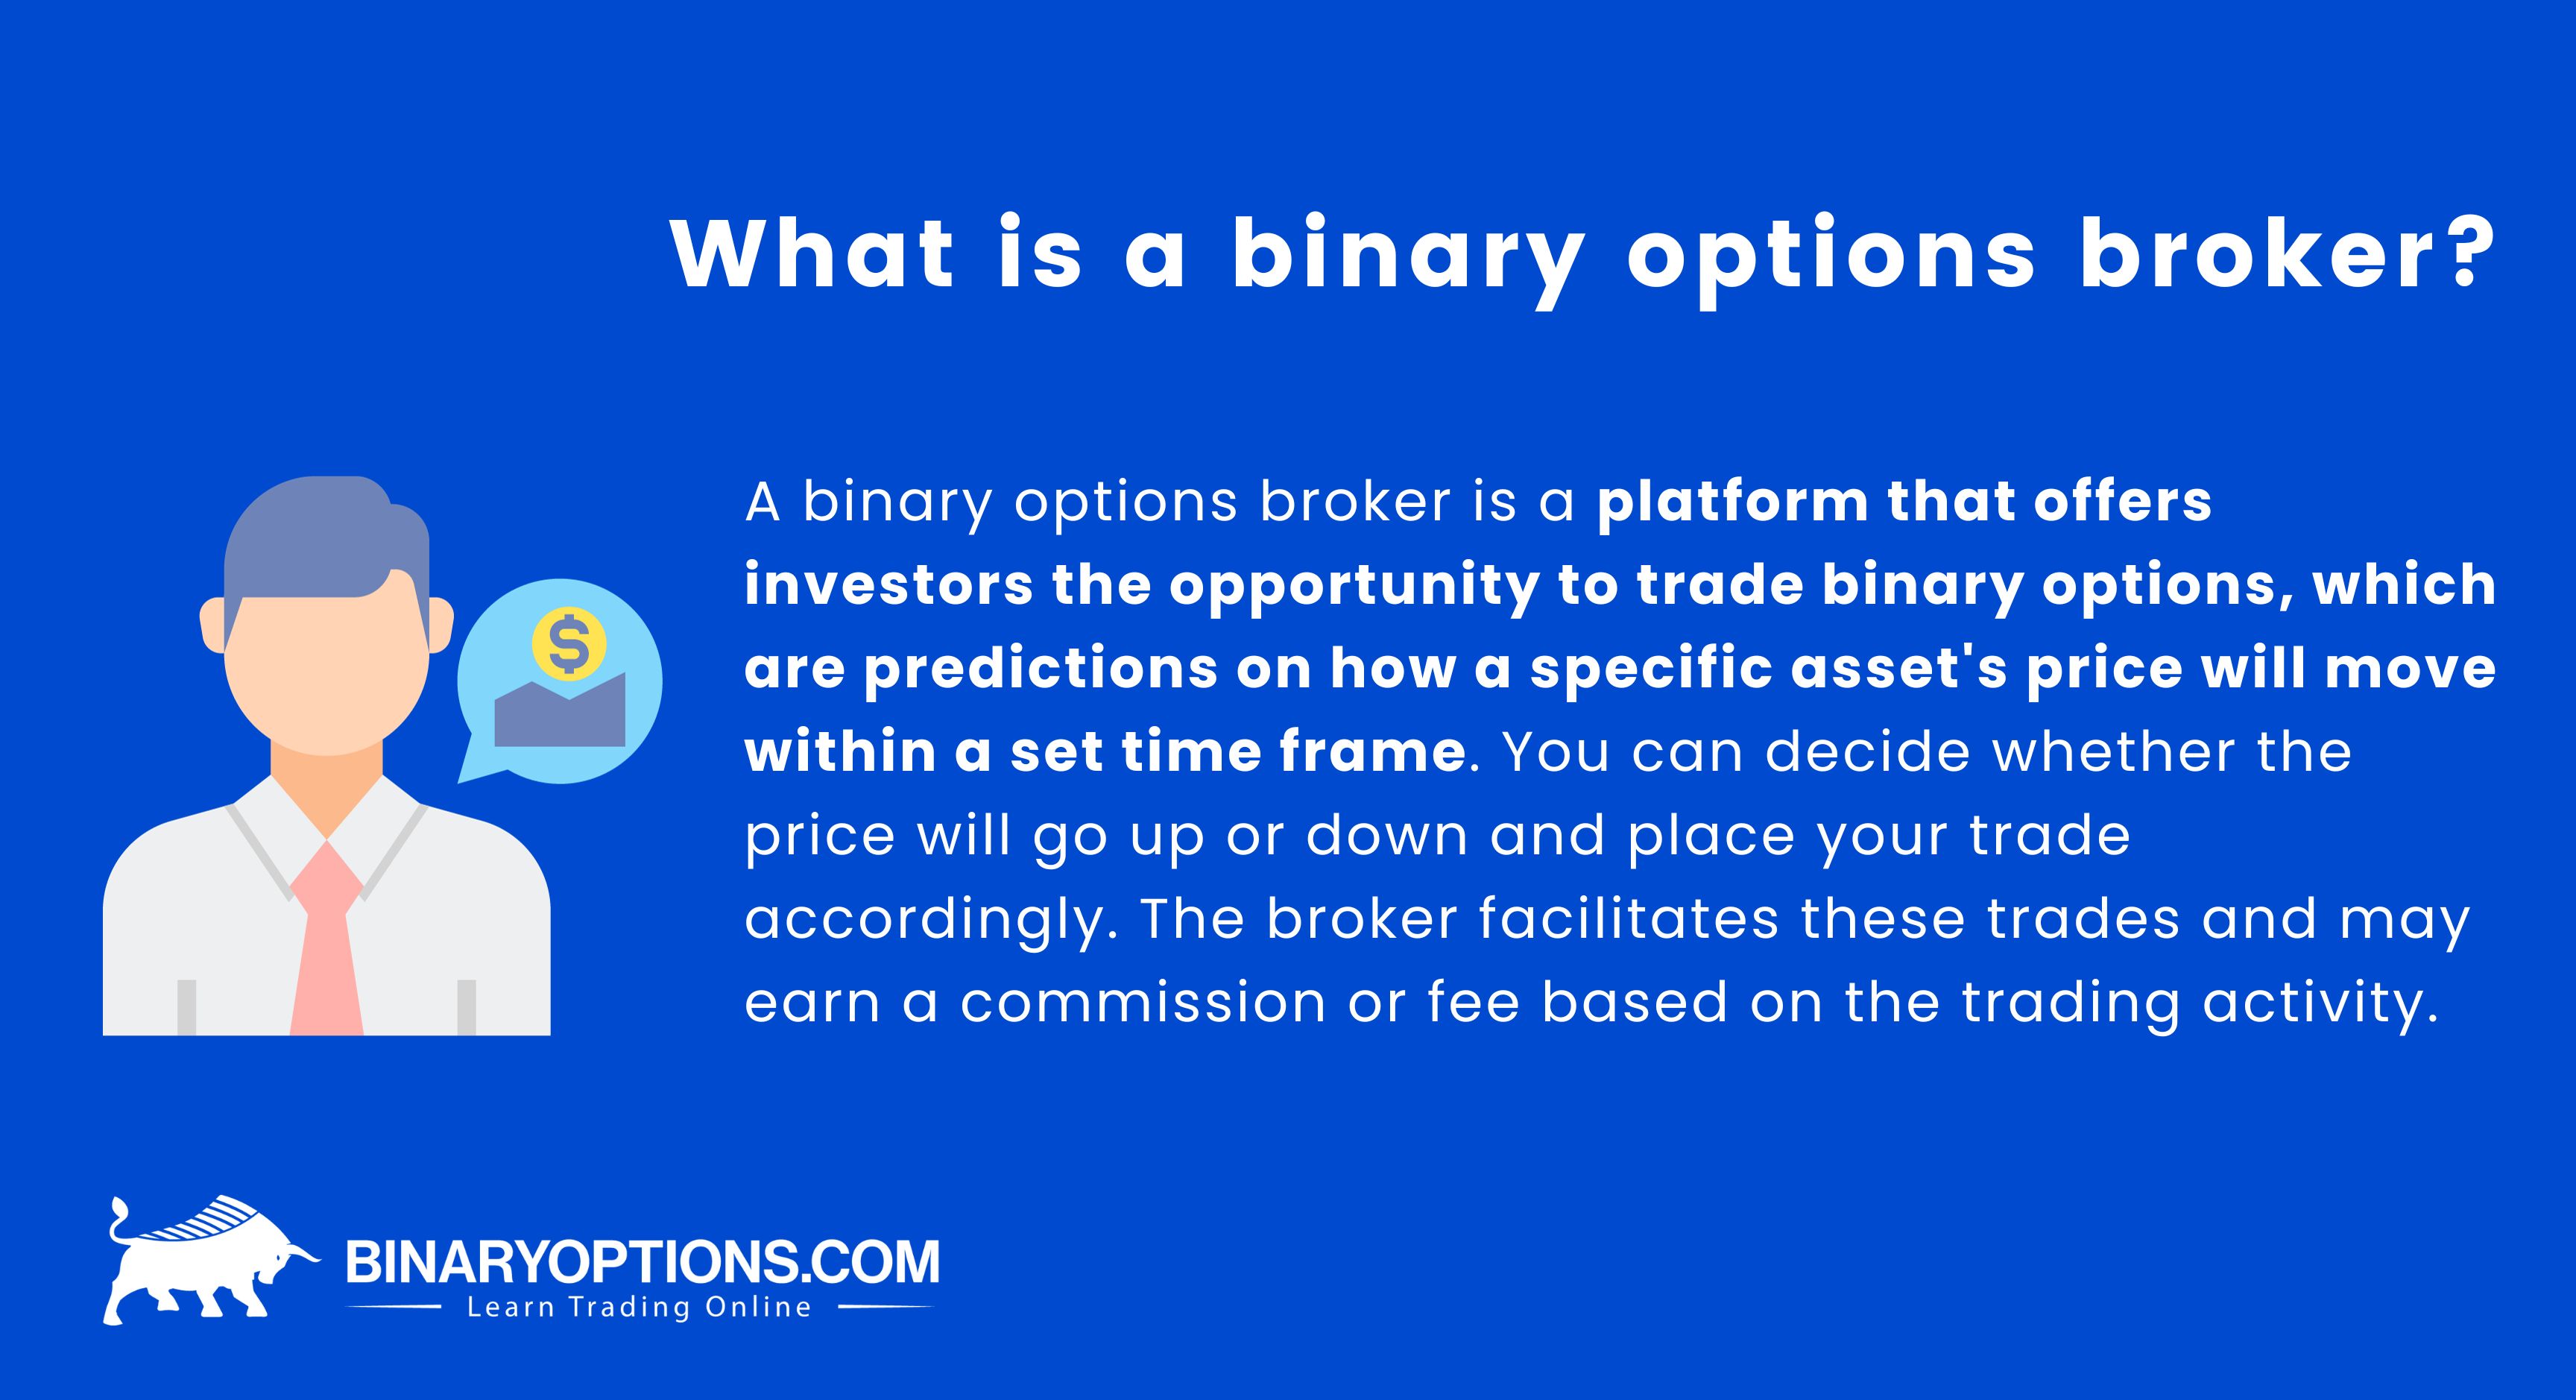 What is a binary options broker